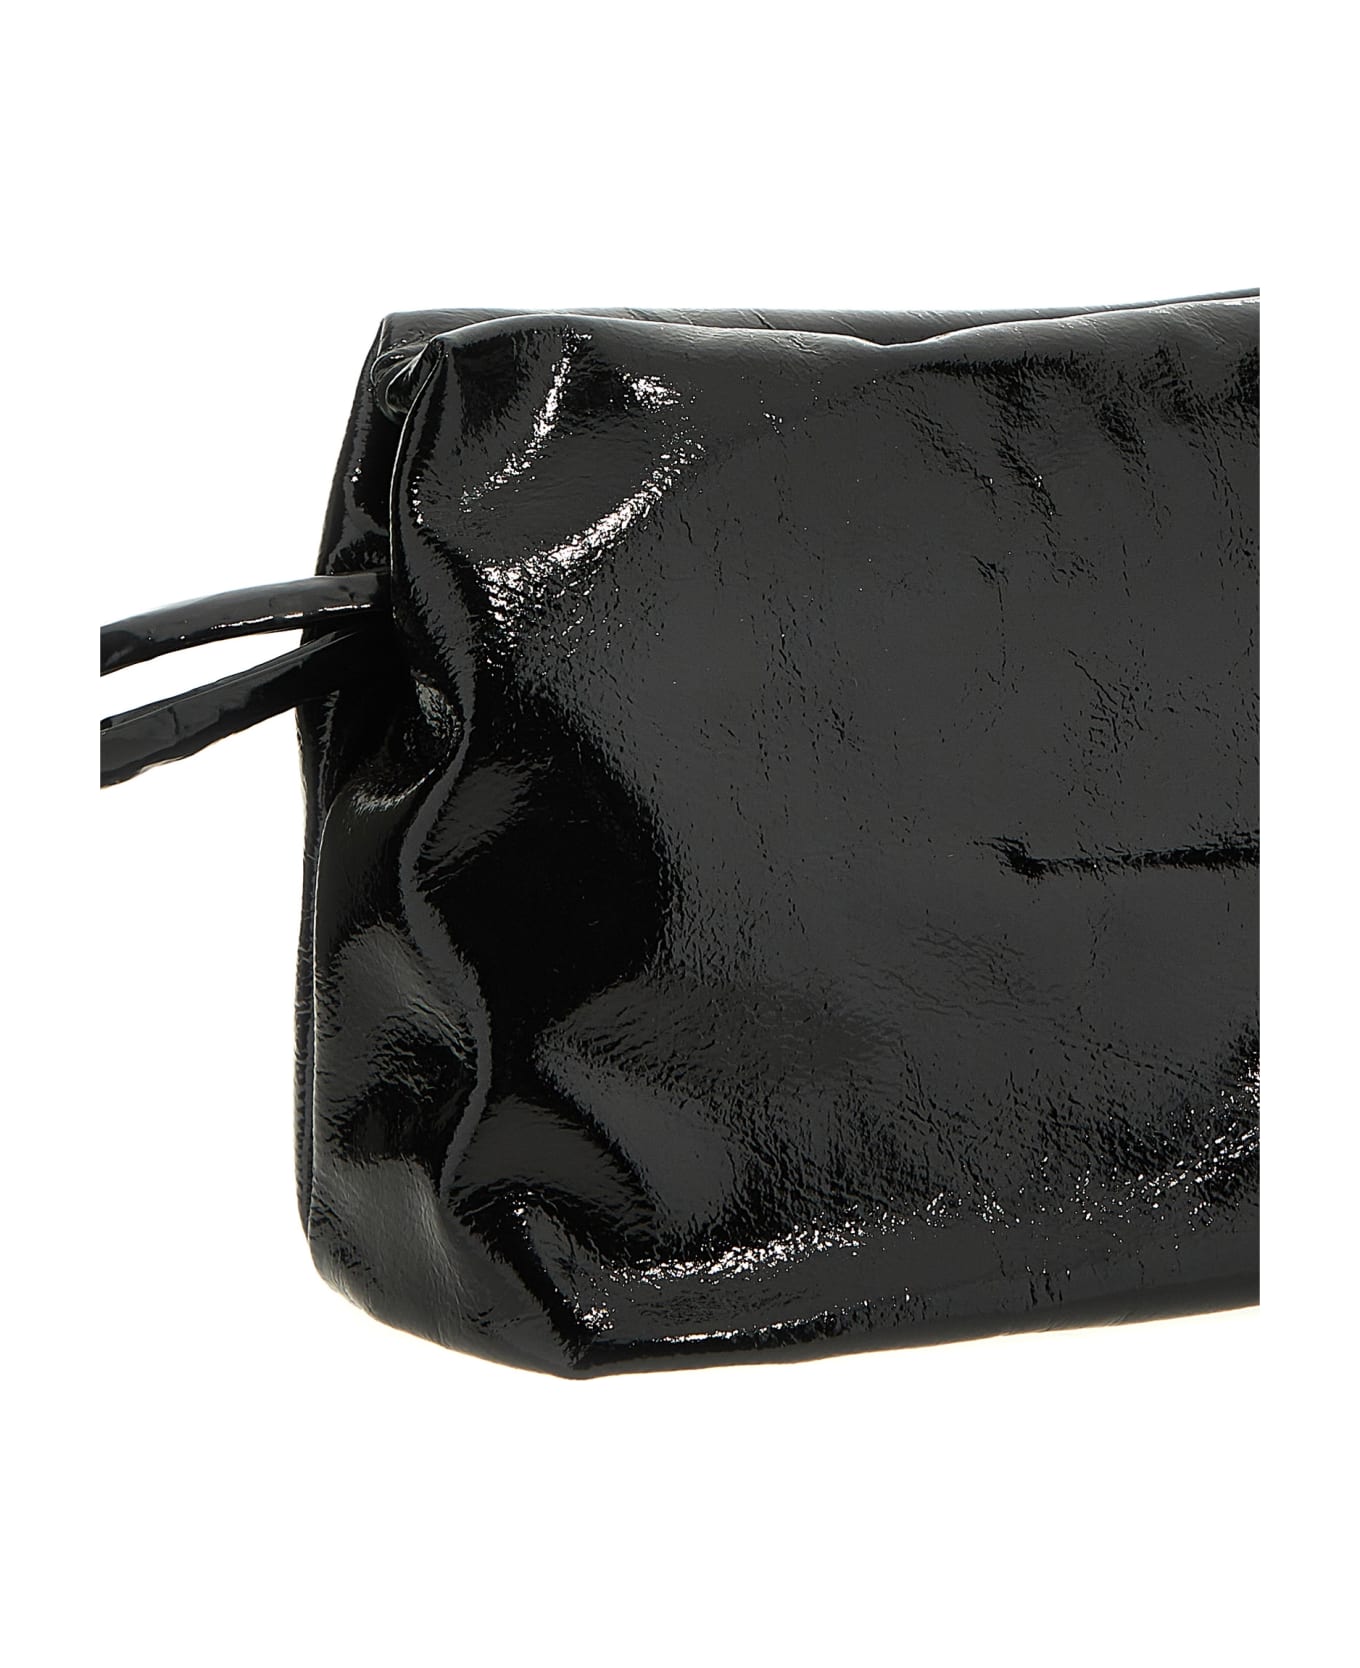 KASSL Editions 'lacquer' Clutch - Black  